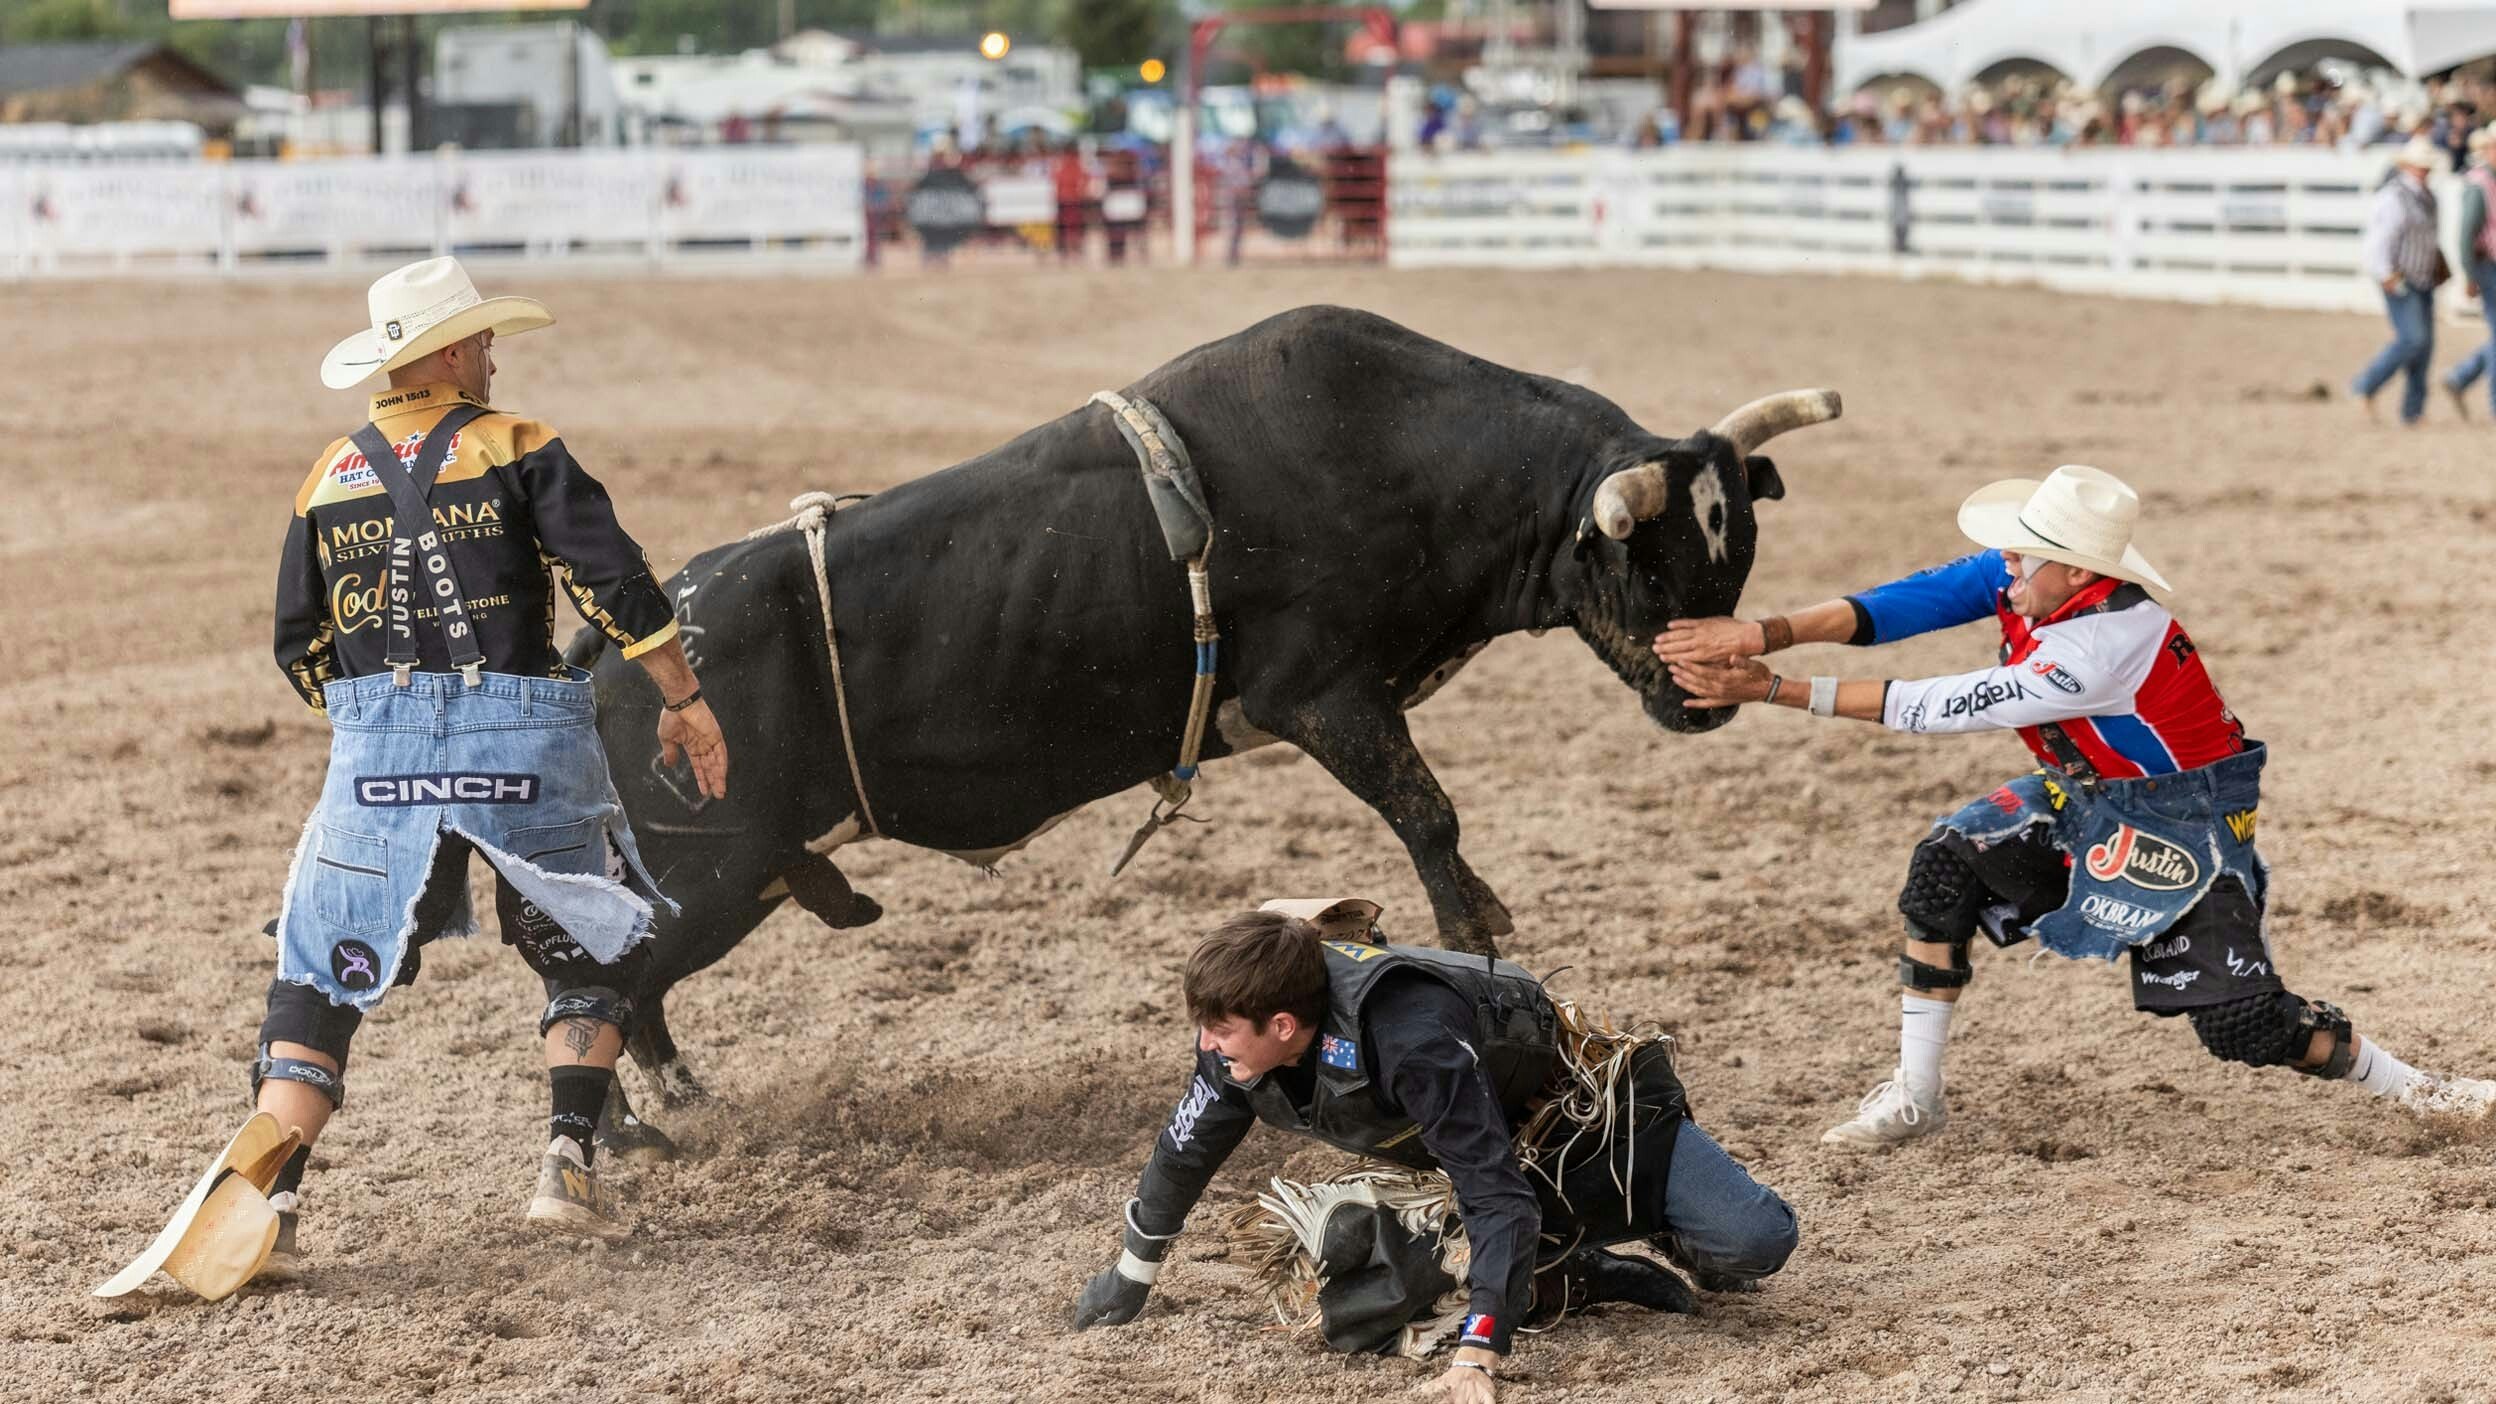 Bull Fighters Dusty Tuckness and Cody Webster jump in to save a bull rider at Cheyenne Frontier Days on July 30, 2023.